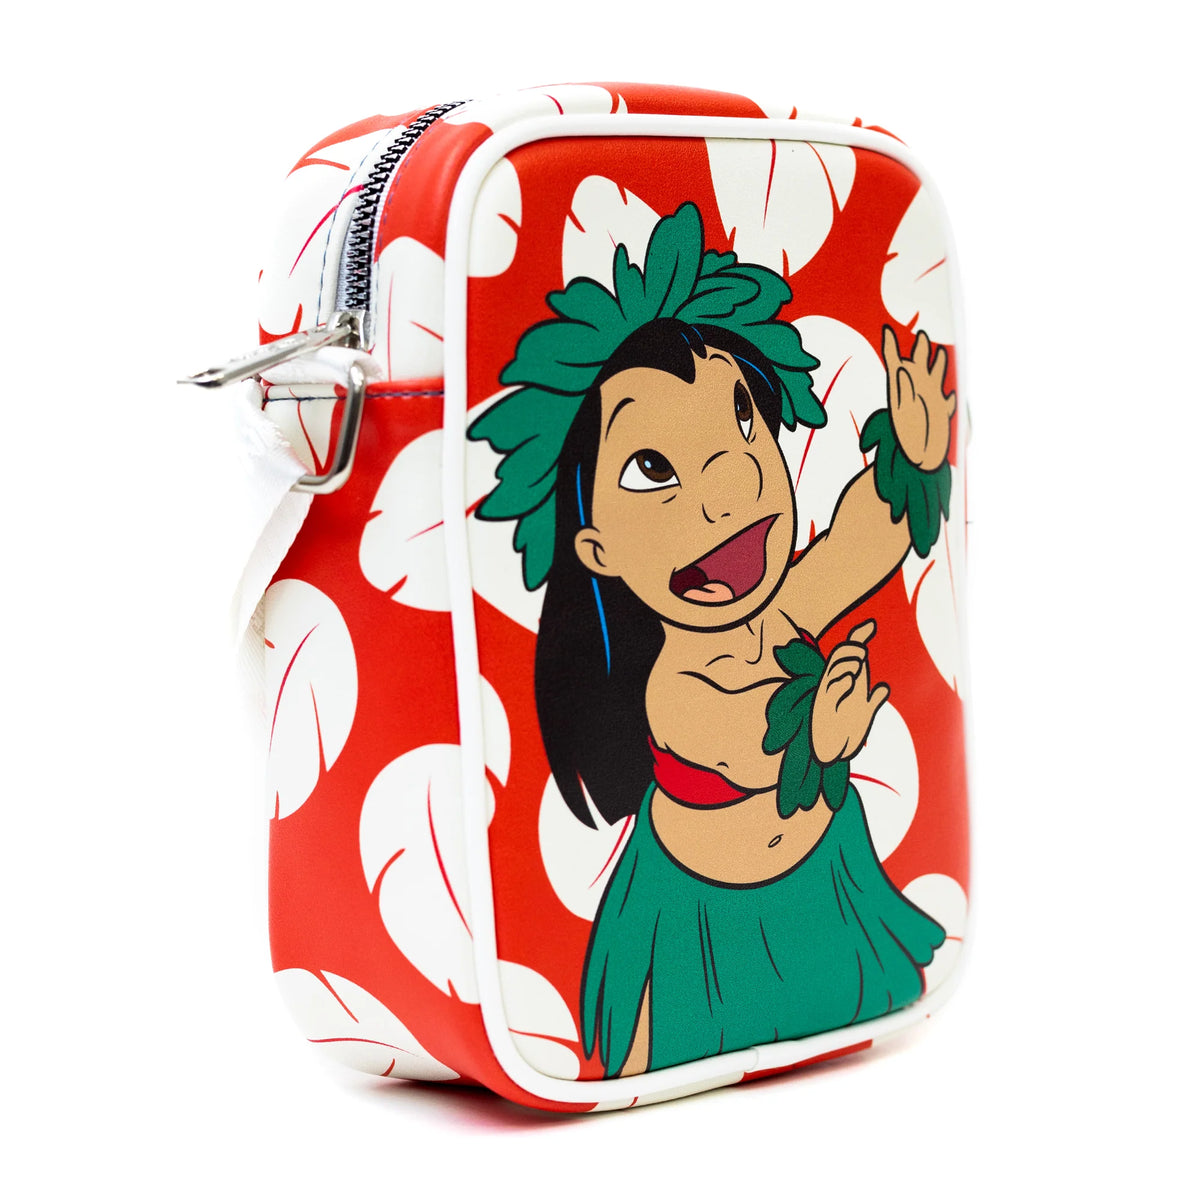 Disney Lilo and Stitch Lilo Hula Pose and Dress Print Red Vegan Leather Bag and Coin Purse Combo